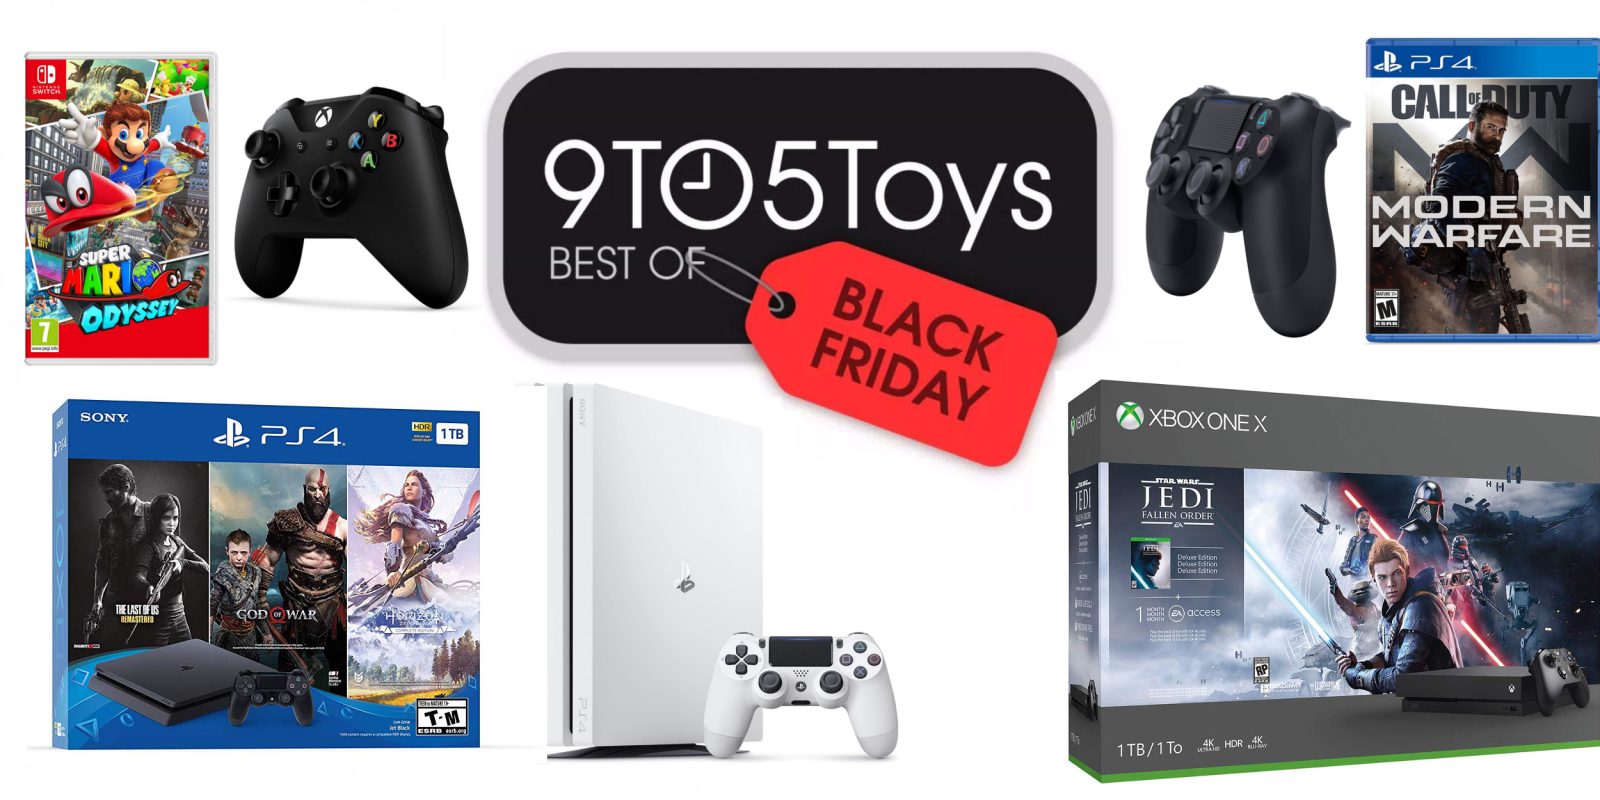 Flipboard: Best of Black Friday 2019 – Gaming: PS4 $160 off, Xbox One $150 off, games, more